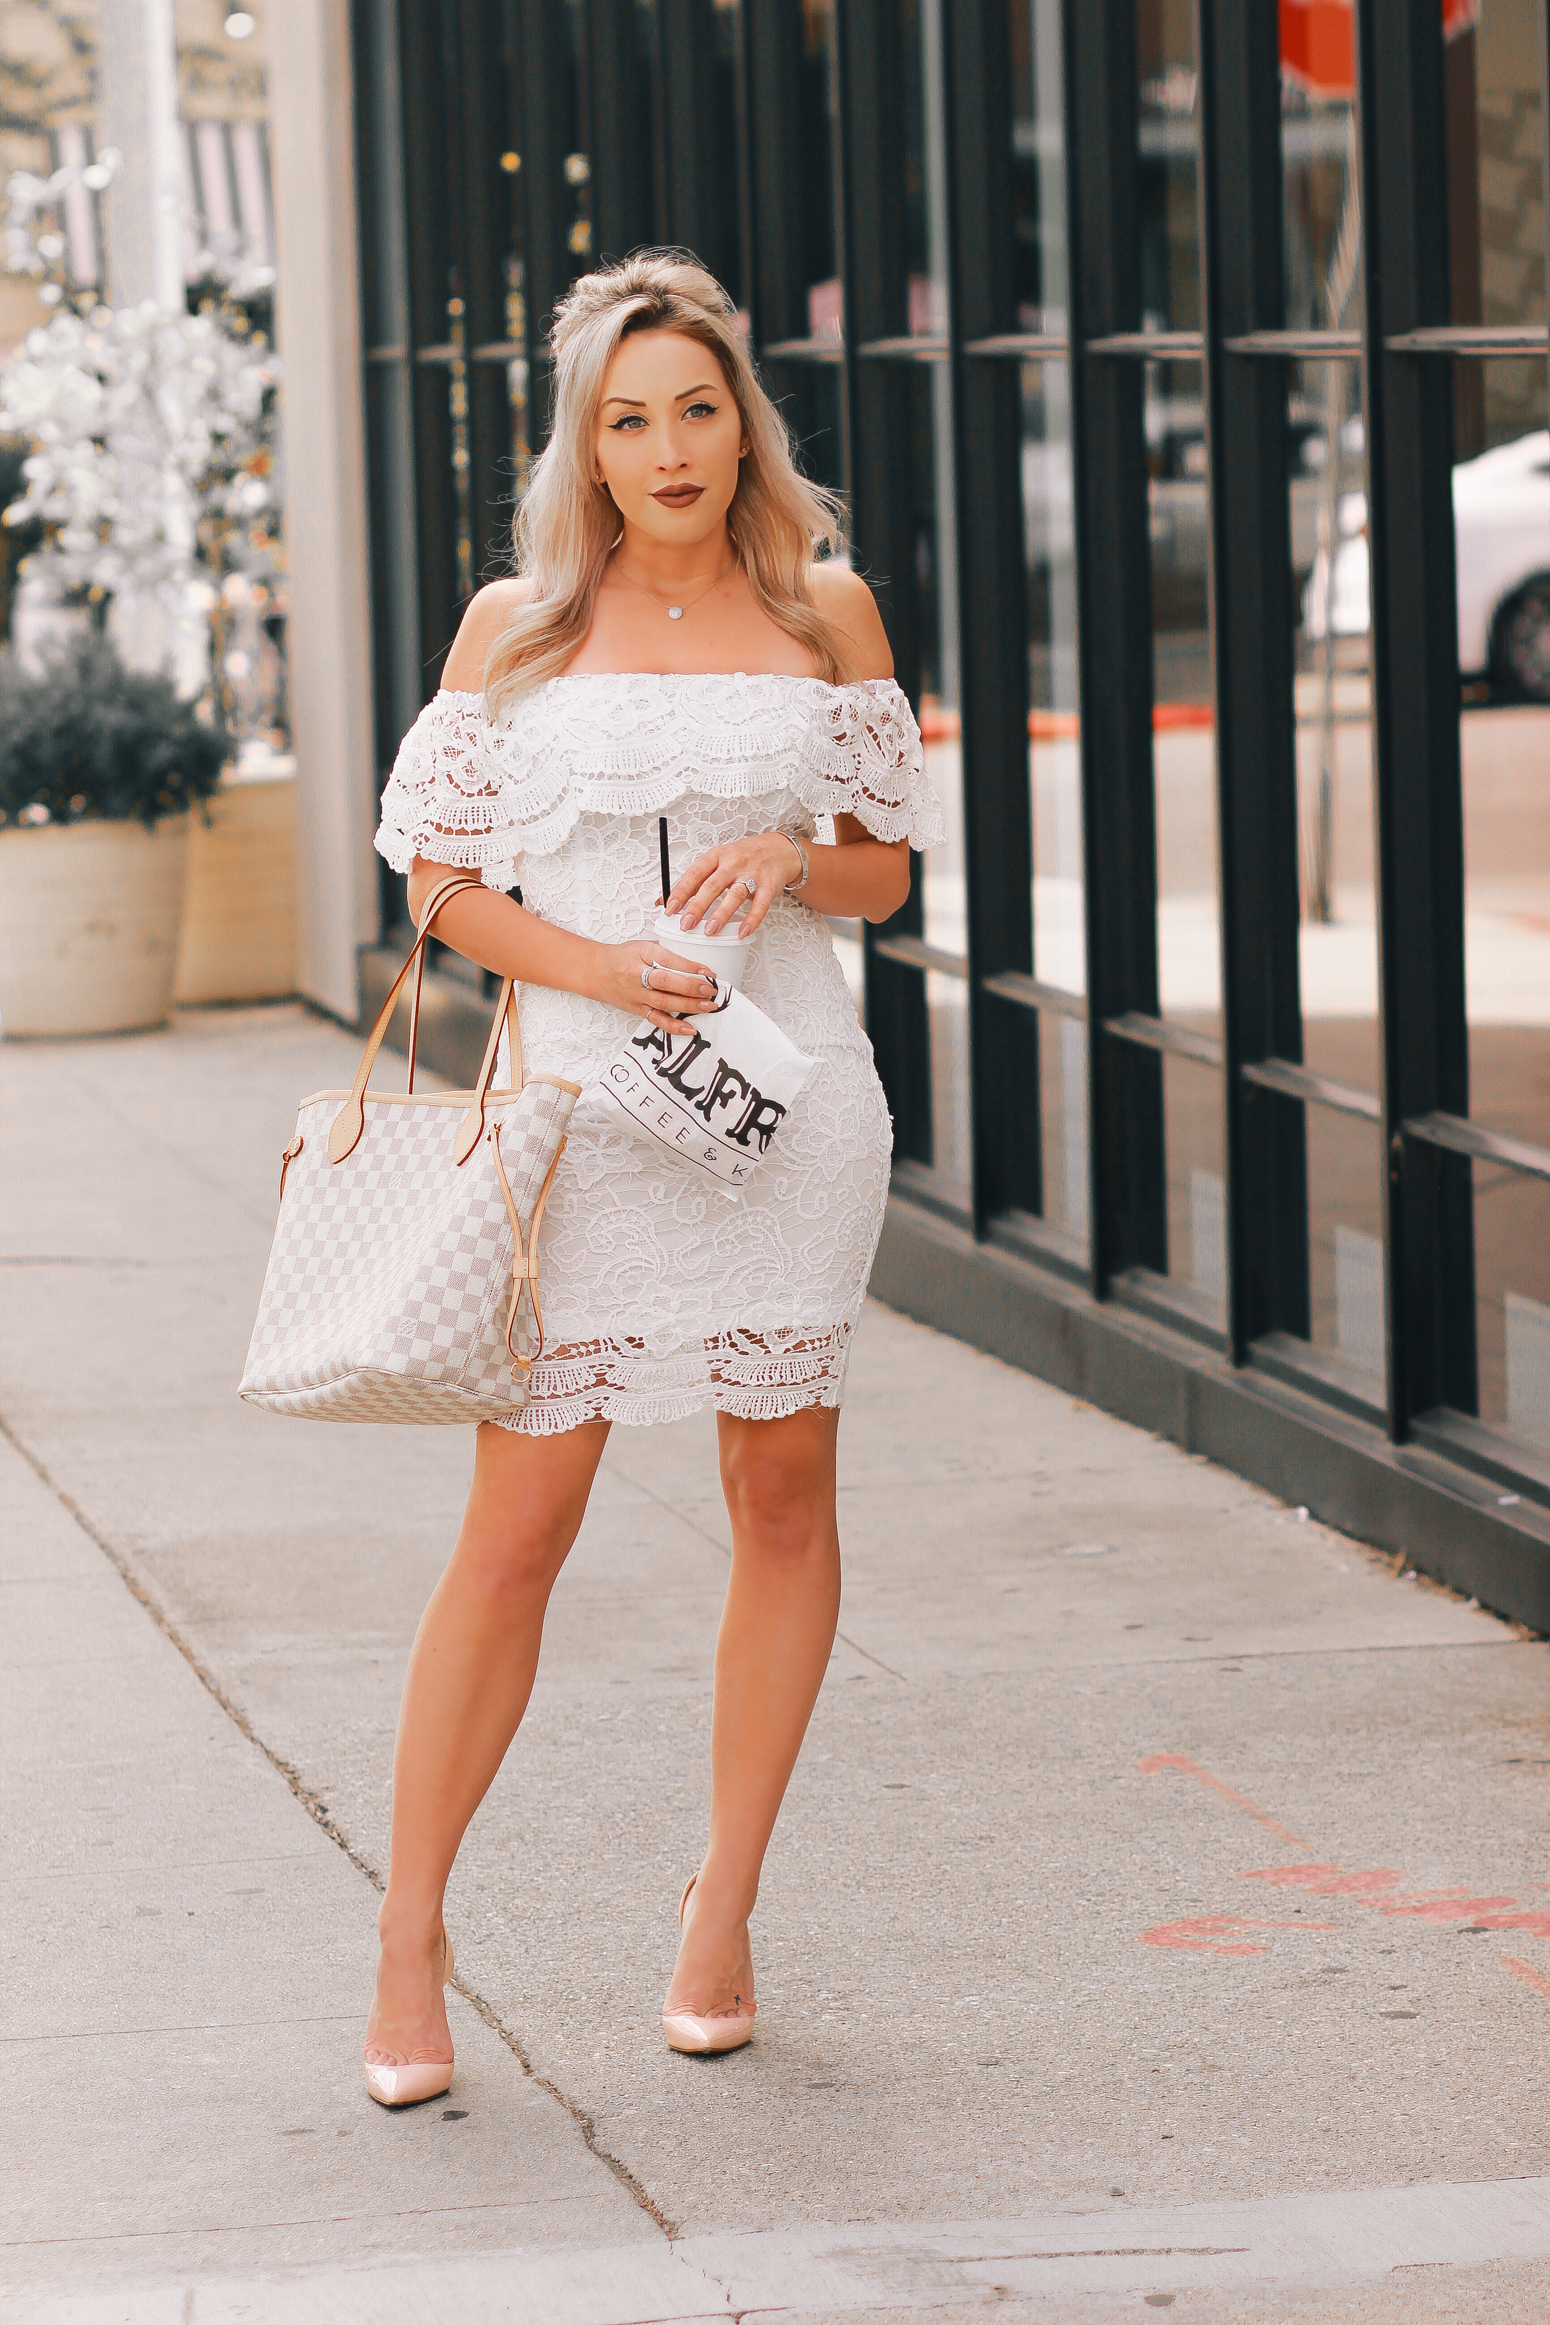 Blondie in the City | White Lace & Louis Vuitton